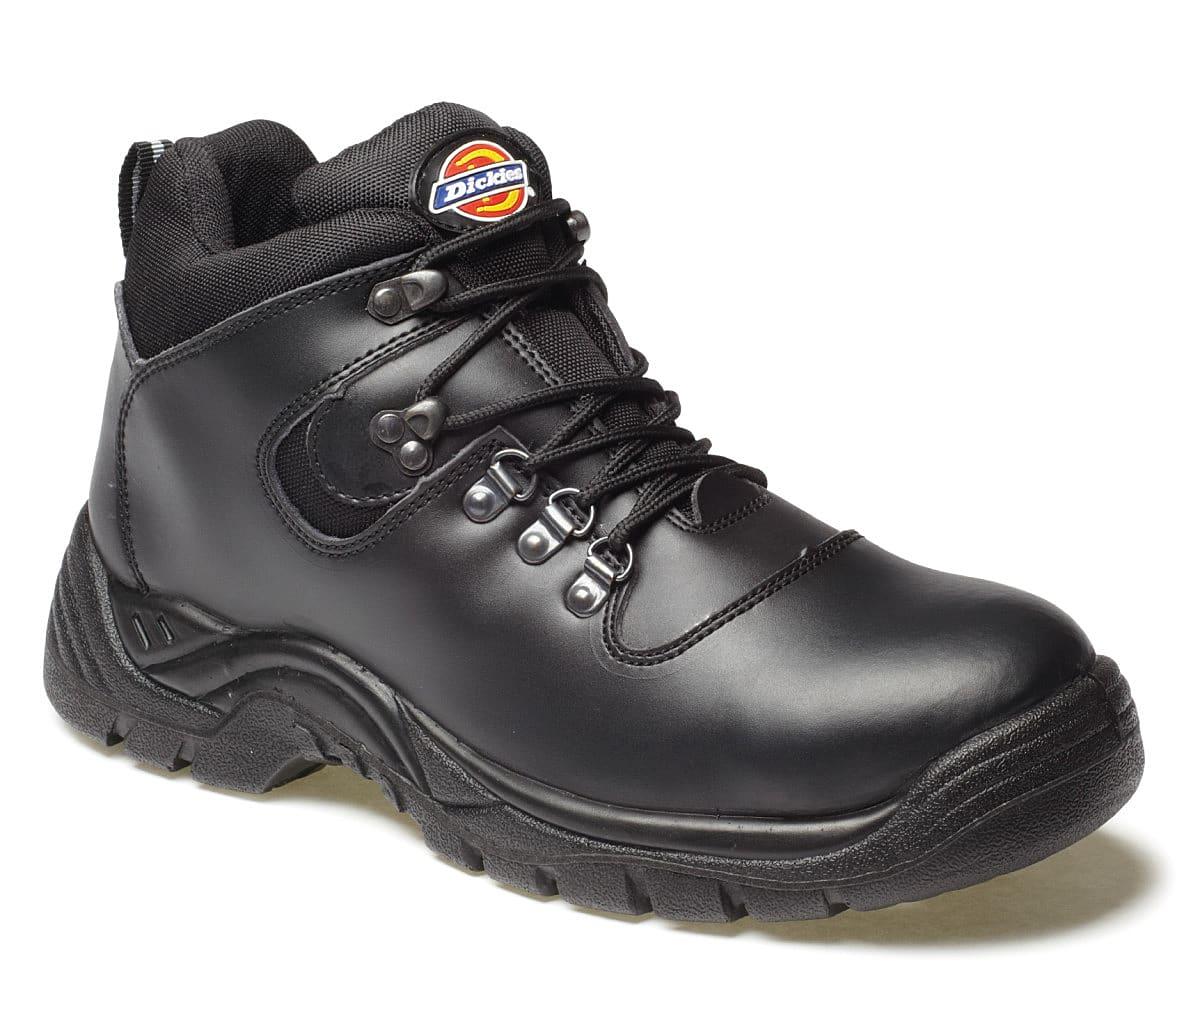 Dickies Fury Super Safety Hiker Boots in Black (Product Code: FA23380A)